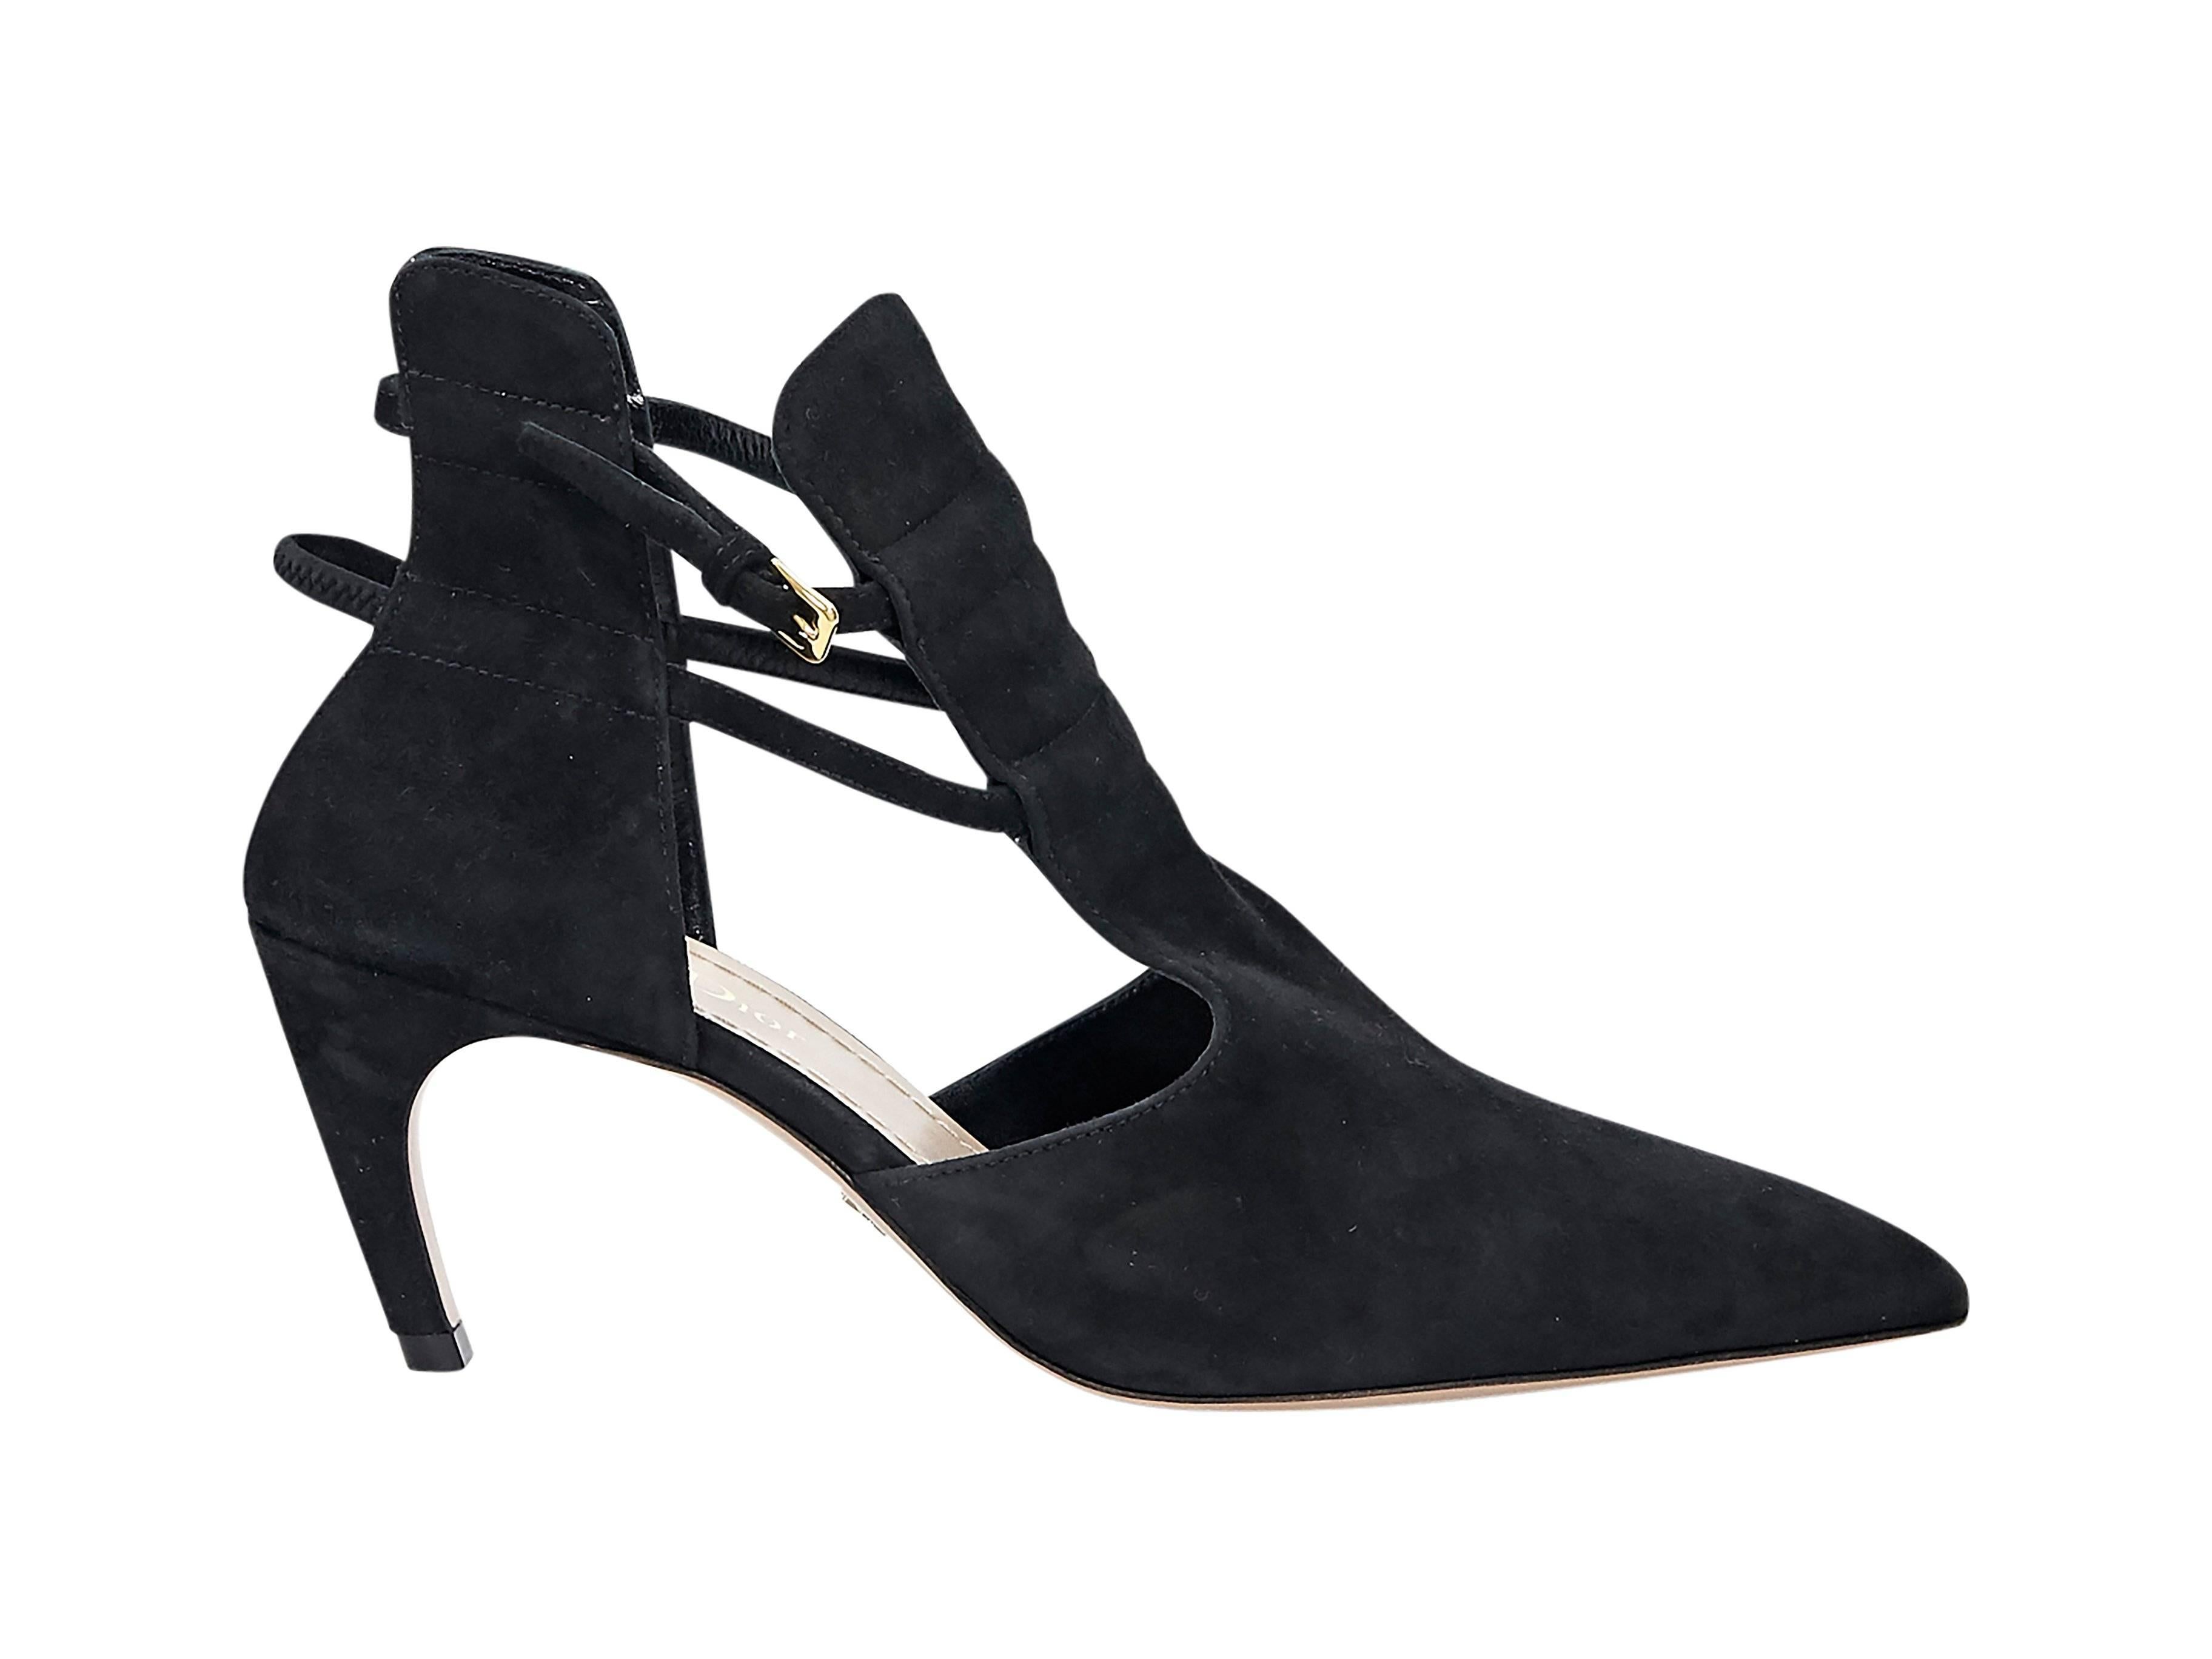 Product details:  Black suede kitten heels by Christian Dior.  Adjustable ankle strap.  Cutout sides.  Point toe. 
Condition: Pre-owned. Very good.
Est. Retail $890